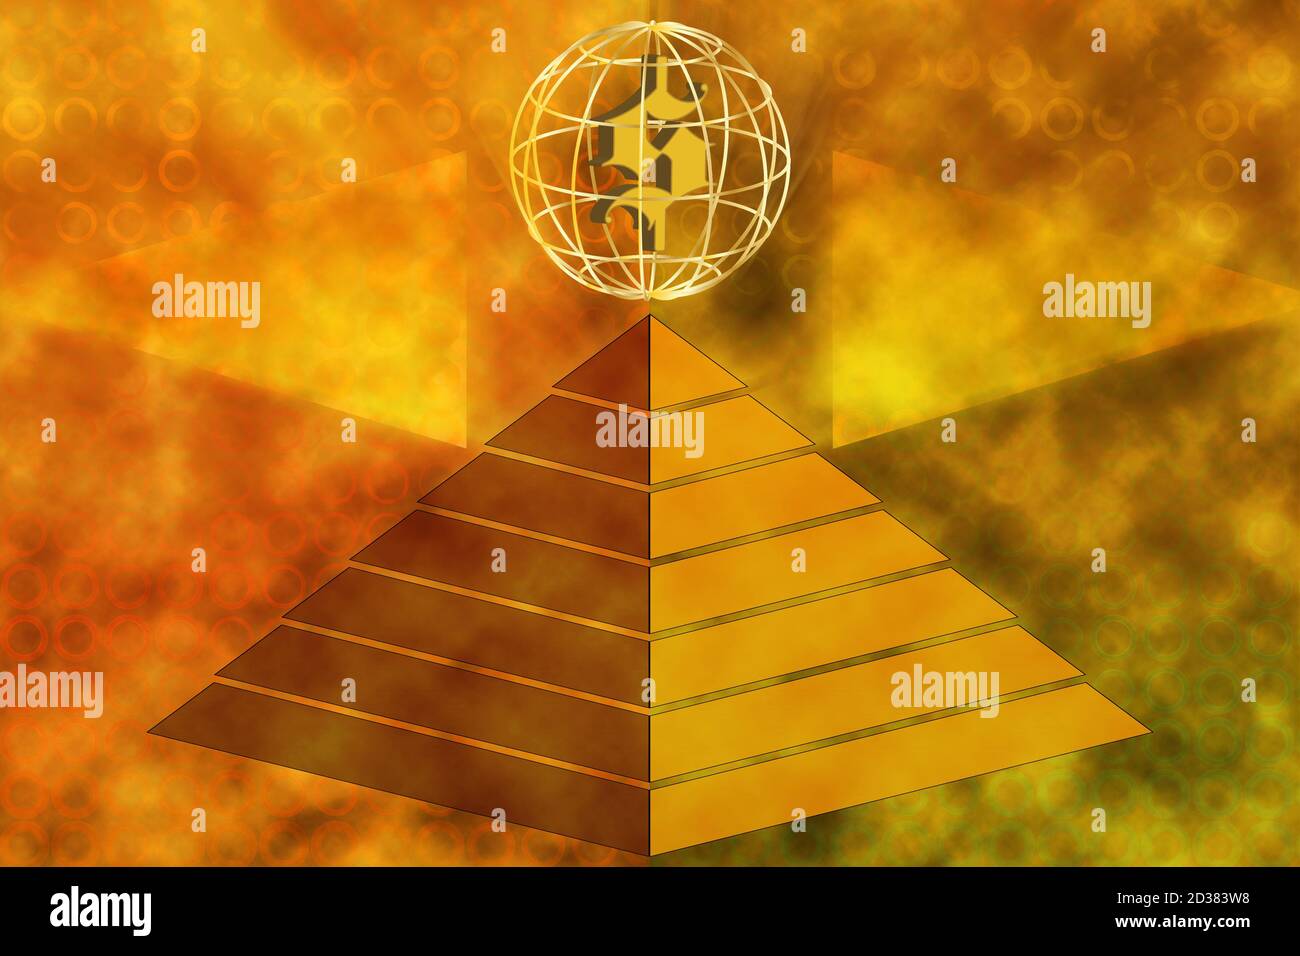 An abstract 3d pyramid shape background image. Stock Photo